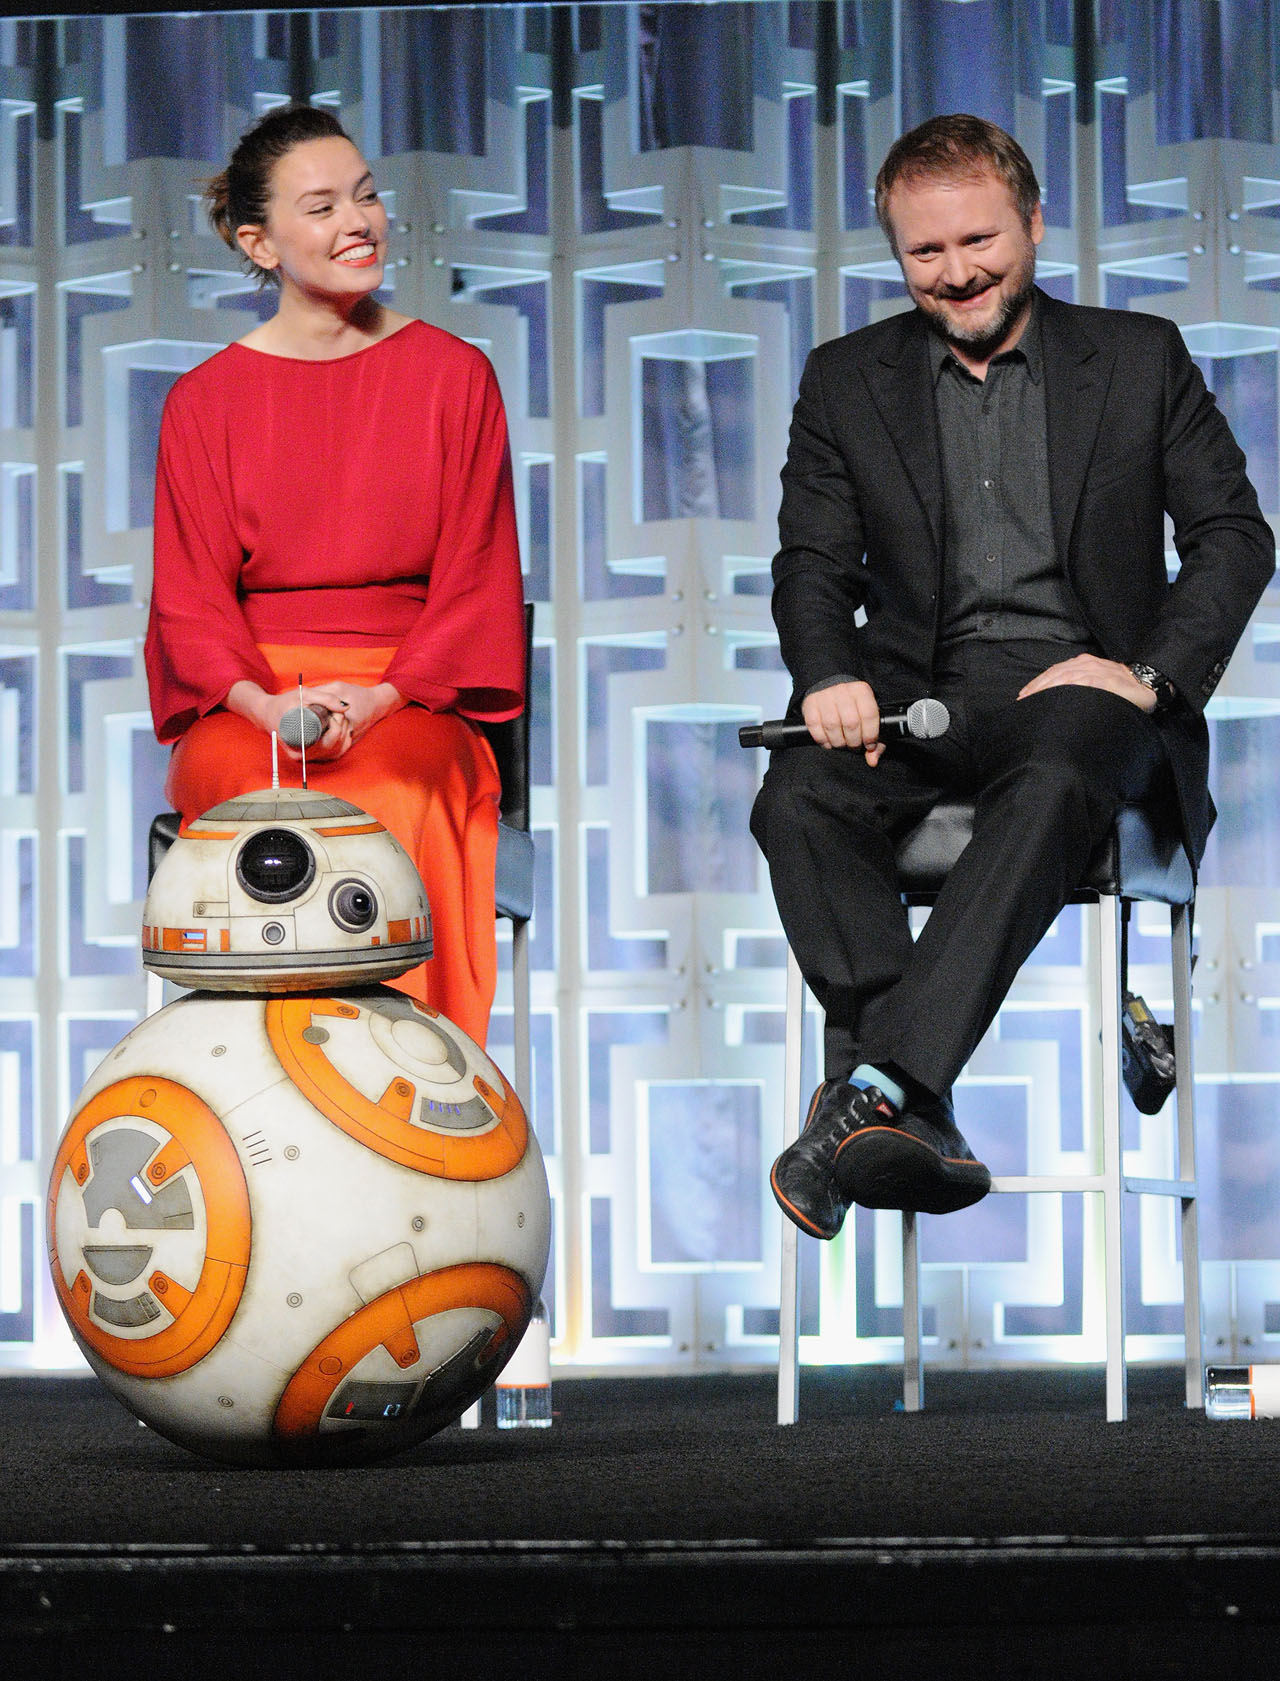 ORLANDO, FL - APRIL 14: BB-8, Daisy Ridley and Rian Johnson attend the STAR WARS: THE LAST JEDI PANEL during the 2017 STAR WARS CELEBRATION at Orange County Convention Center on April 14, 2017 in Orlando, Florida.  (Photo by Gerardo Mora/Getty Images for Disney) *** Local Caption *** BB-8, Daisy Ridley;Rian Johnson